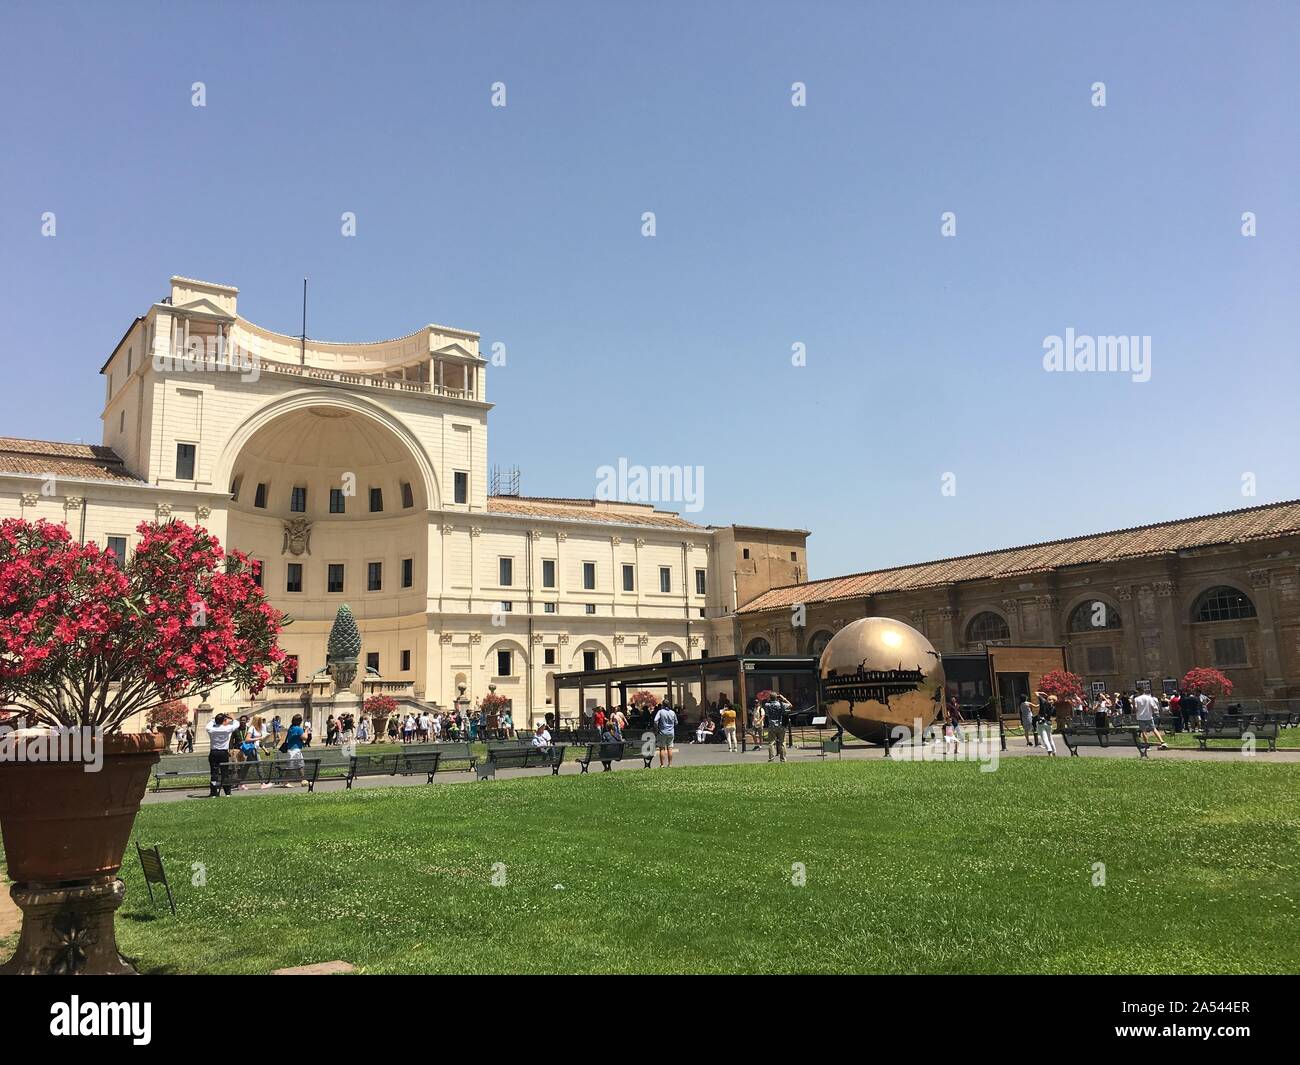 October 18, 2019, Vatican, Vatican, China: The Vatican museum is the museum of the smallest country in the world.With a total area of 55,000 square meters, the museum, formerly the papal court, is mainly used for the collection and preservation of rare cultural relics and art treasures. (Credit Image: © SIPA Asia via ZUMA Wire) Stock Photo